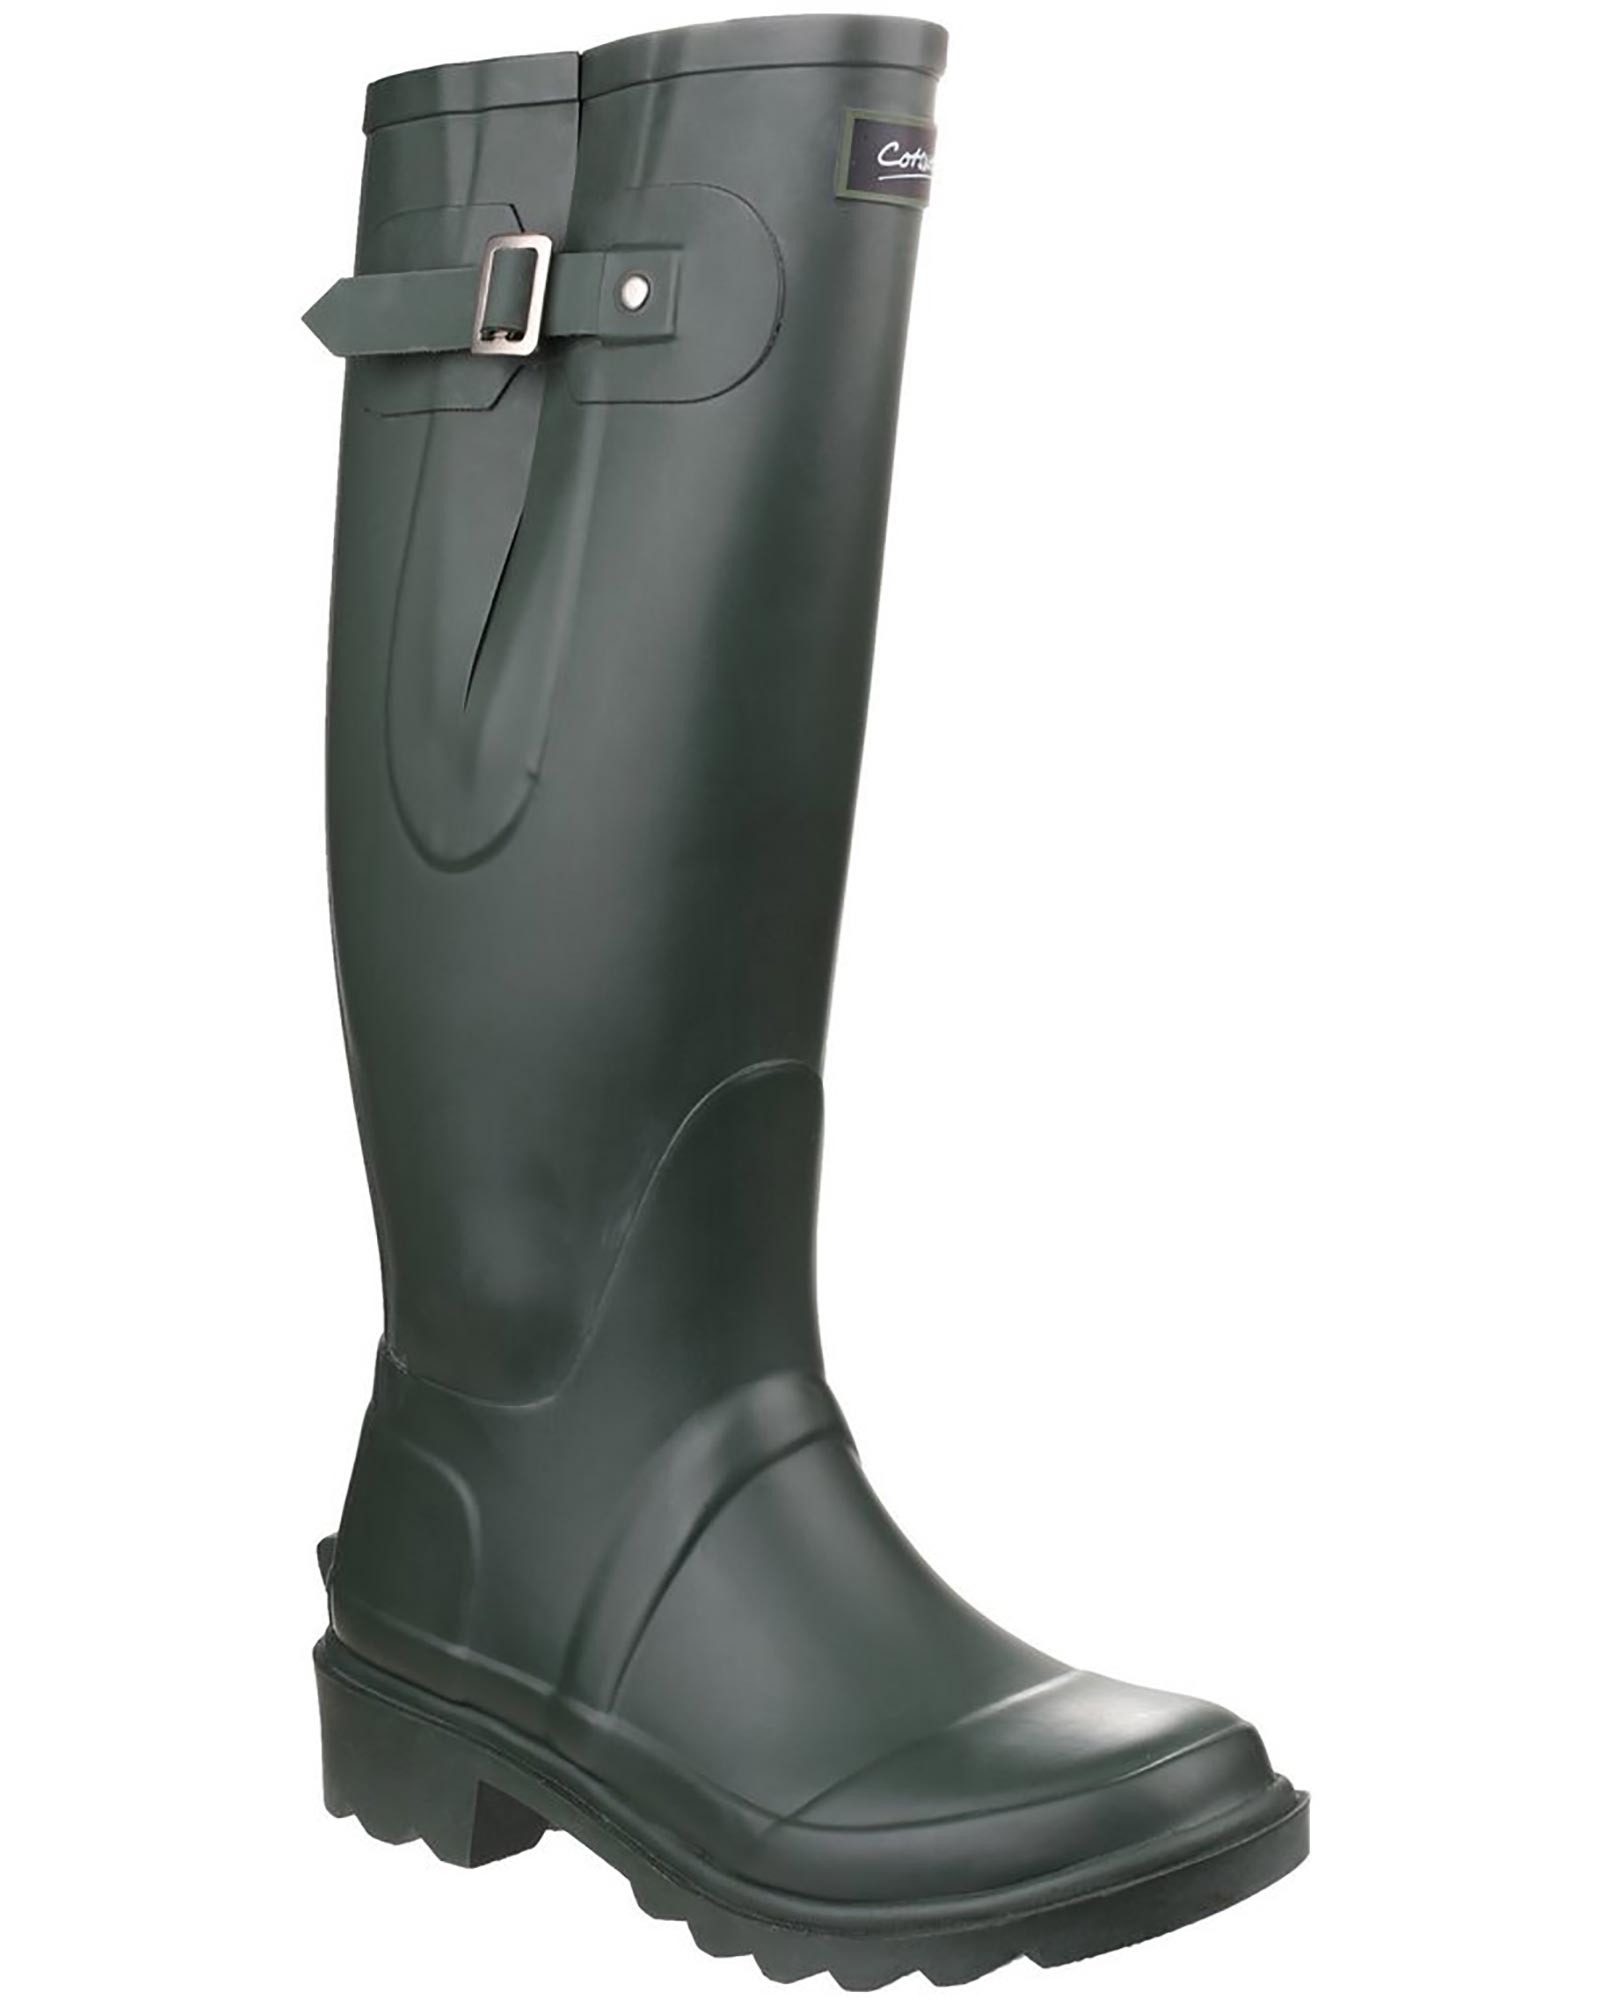 Product image of Cotswold Ragley Men's Wellington Boots